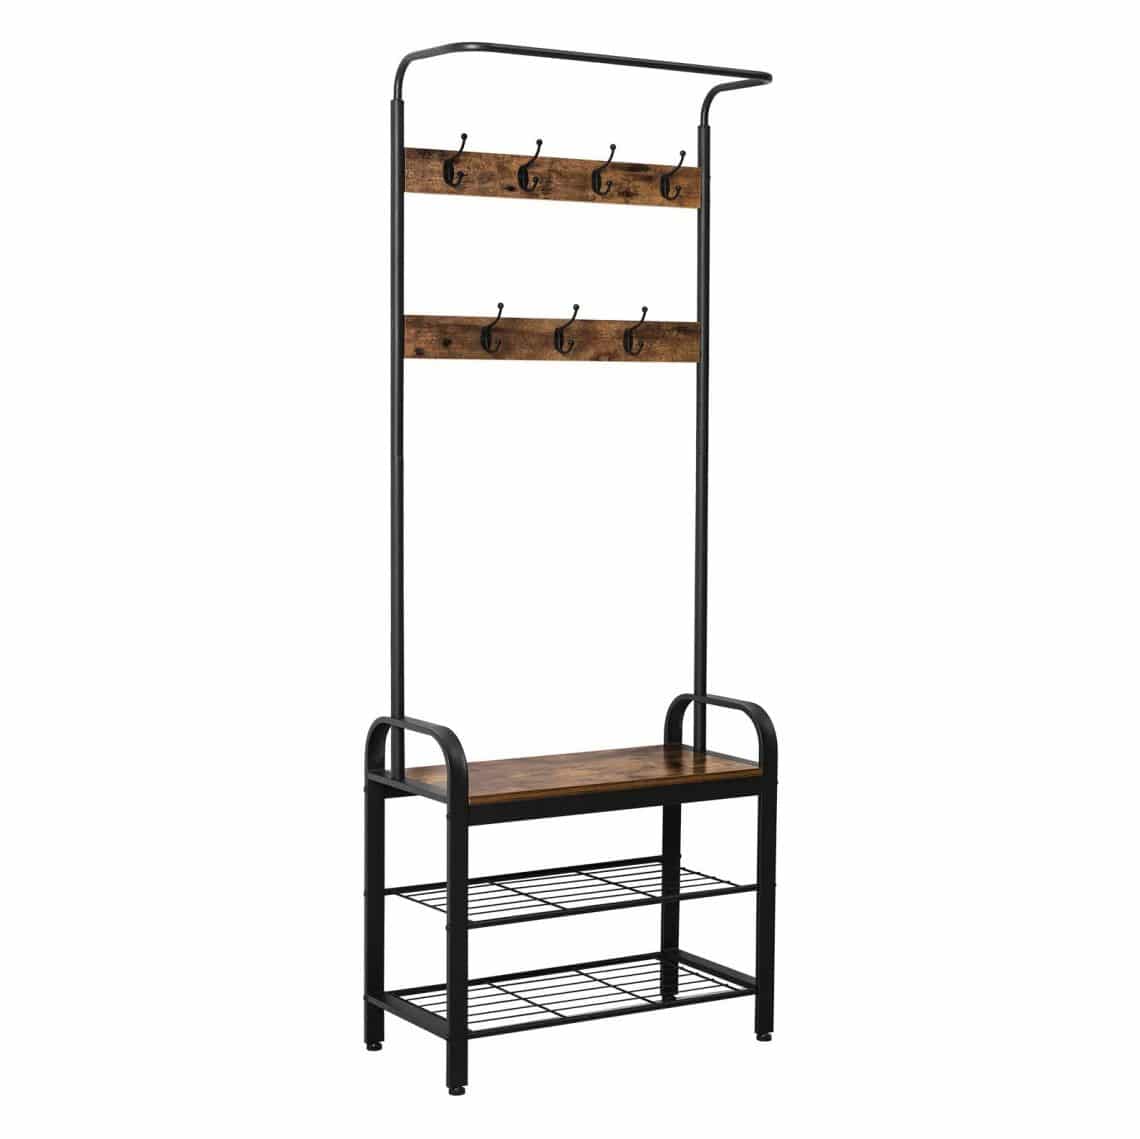 Top 10 Best Coat and Shoe Racks in 2023 Reviews - Put Product Reviews